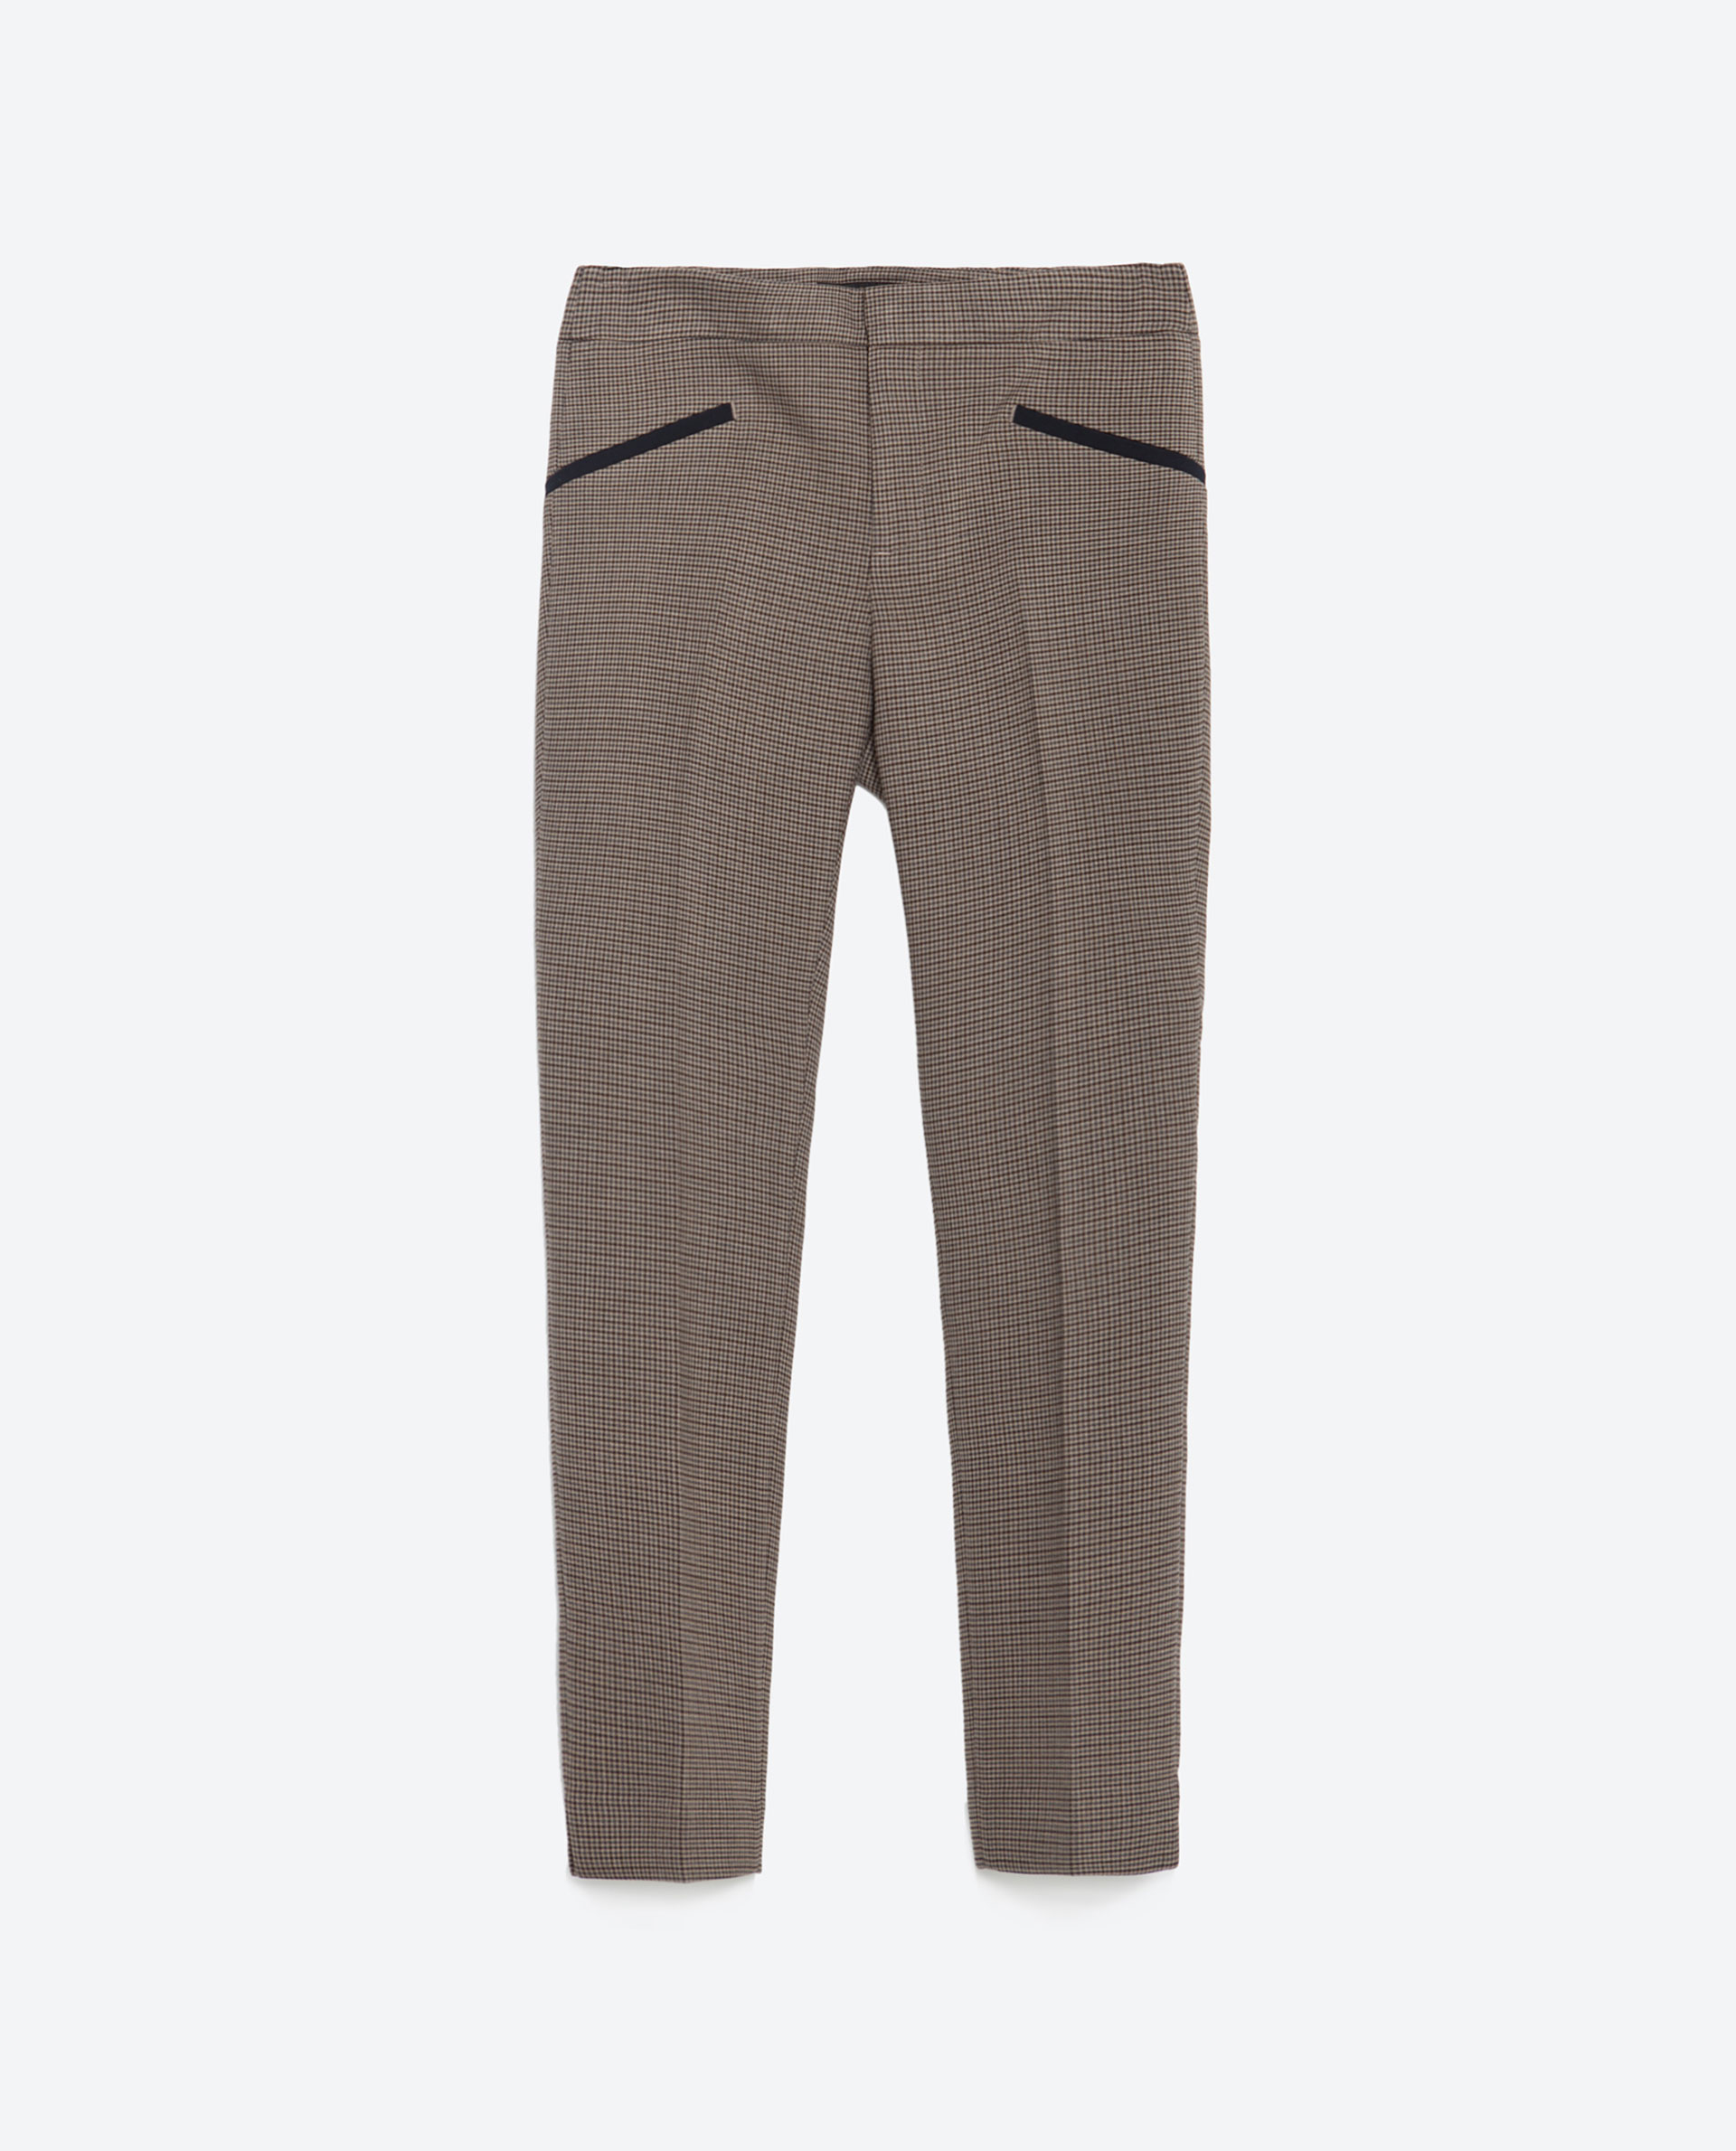 Zara Check Trousers in Gray | Lyst